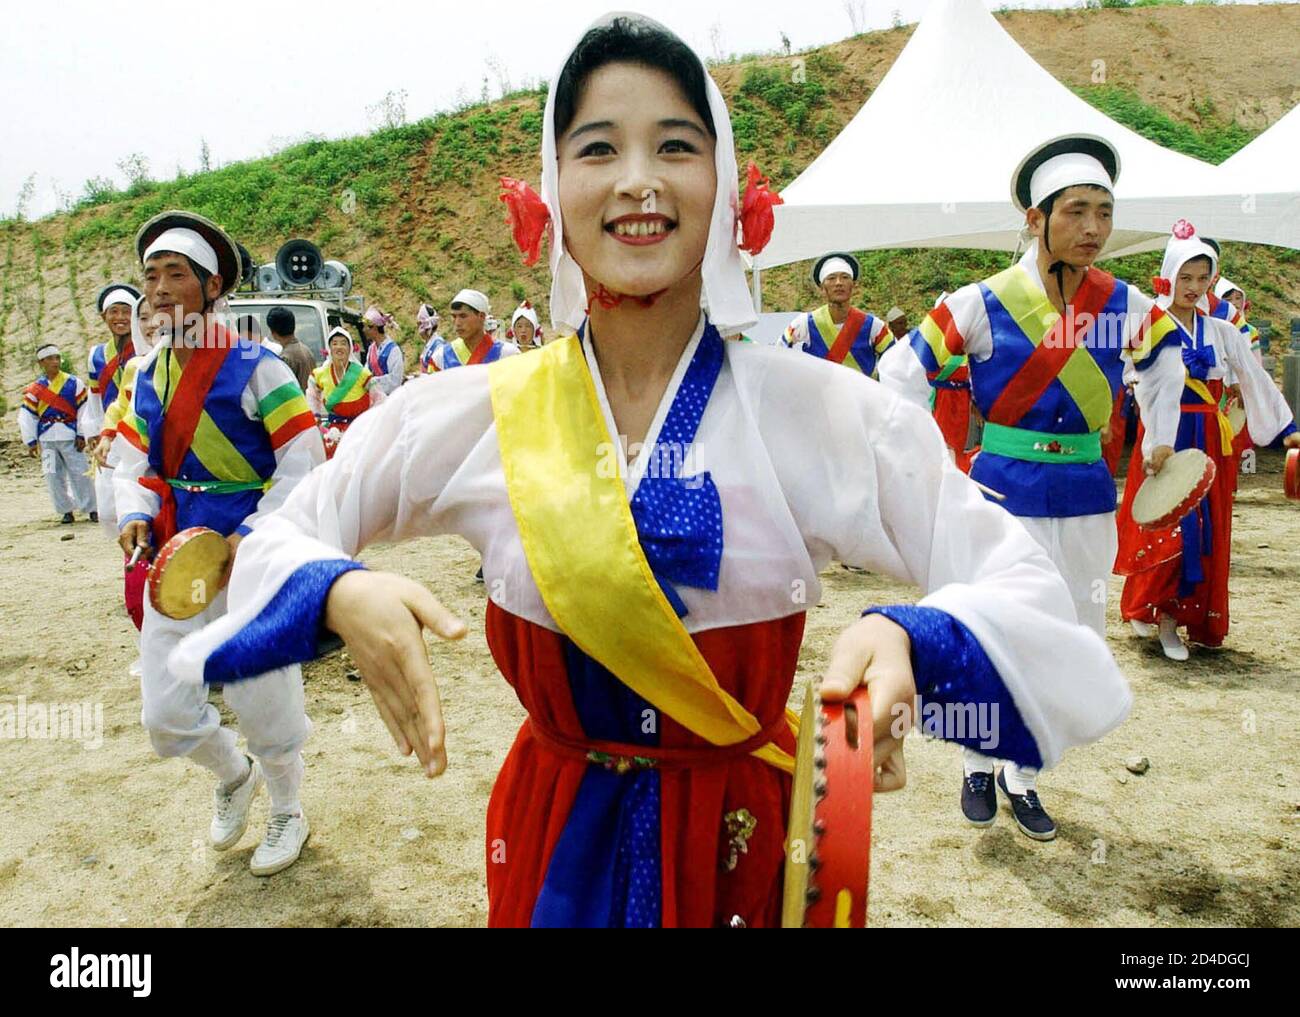 North Korean dancers perform off during a ground-breaking ceremony for an industrial park in Kaesong, North Korea June 30, 2003. North and South Korean officials and businessmen broke ground on Monday for a industrial park in the North that is intended to develop economic ties despite a row over Pyongyang's nuclear arms plans. Pool reports from Kaesong said construction would start next year on a project that will marry South Korean capital and technology with communist North Korea's cheap labour to help revive the North's near-moribund economy. REUTERS/Ahn Young-joon/Pool  CP Stock Photo